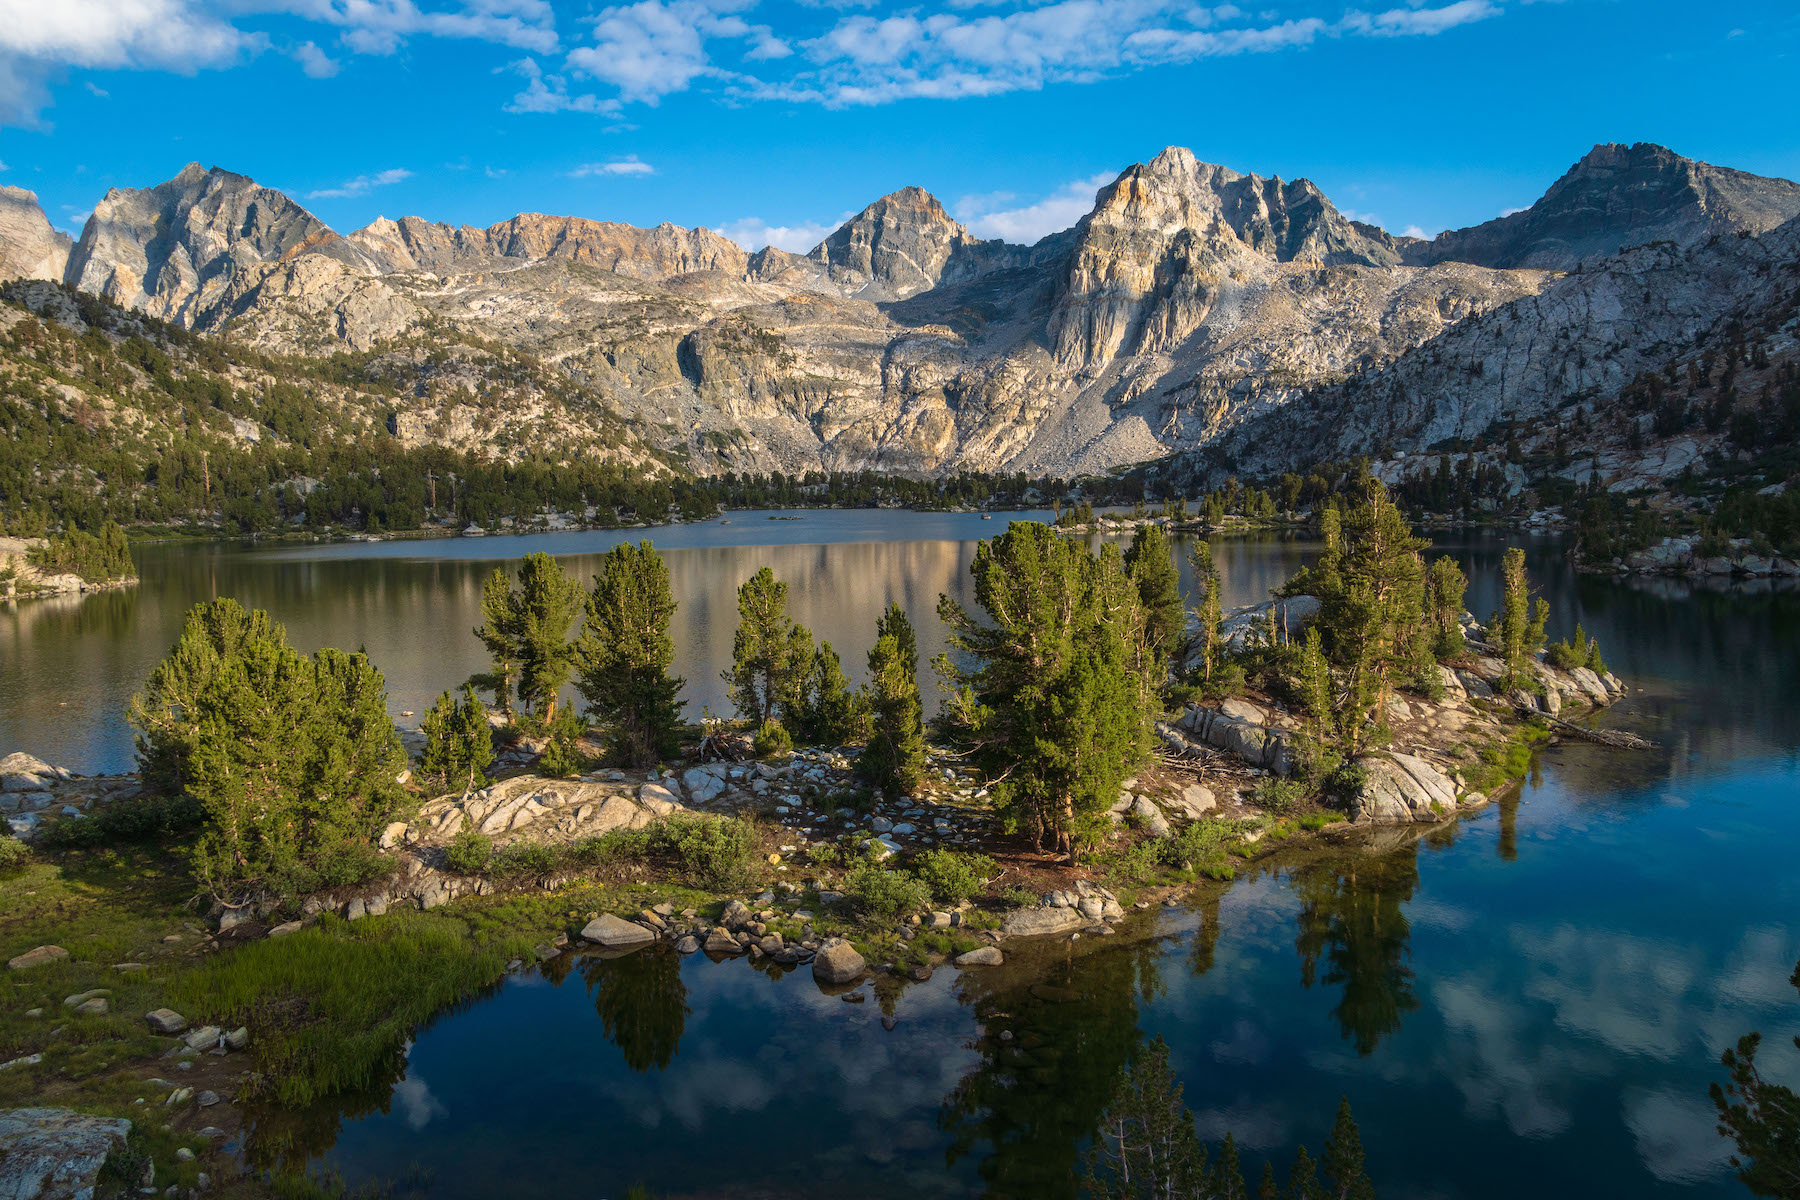 Rae Lakes in Kings Canyon National Park in the Sierras. Photo by Brock Dallman